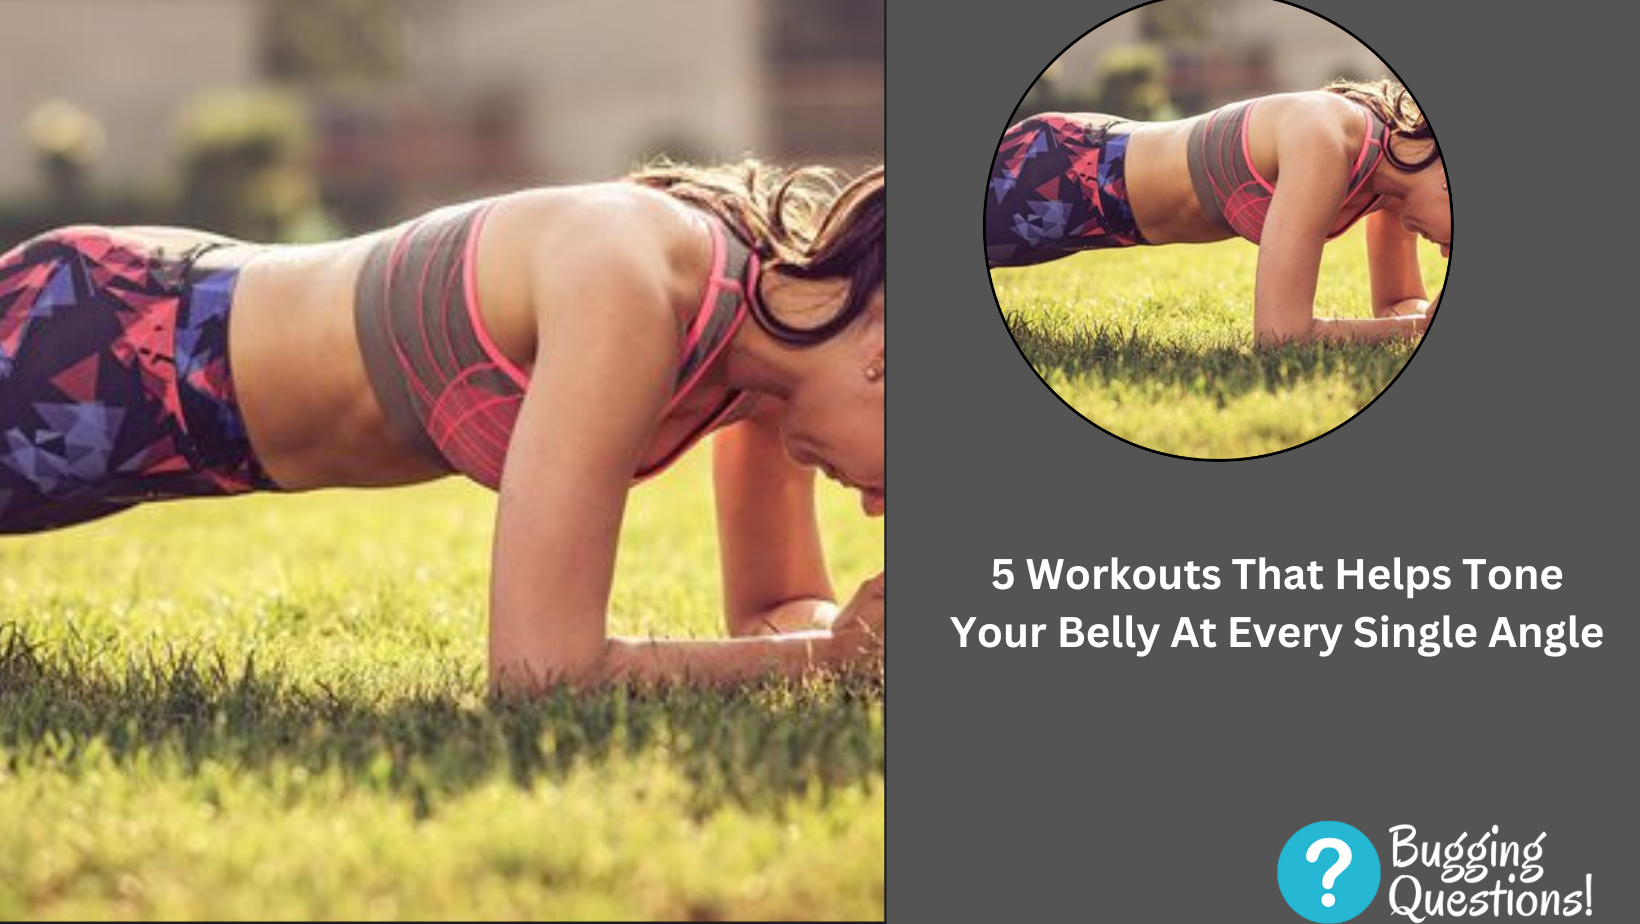 Workouts That Helps Tone Your Belly At Every Single Angle